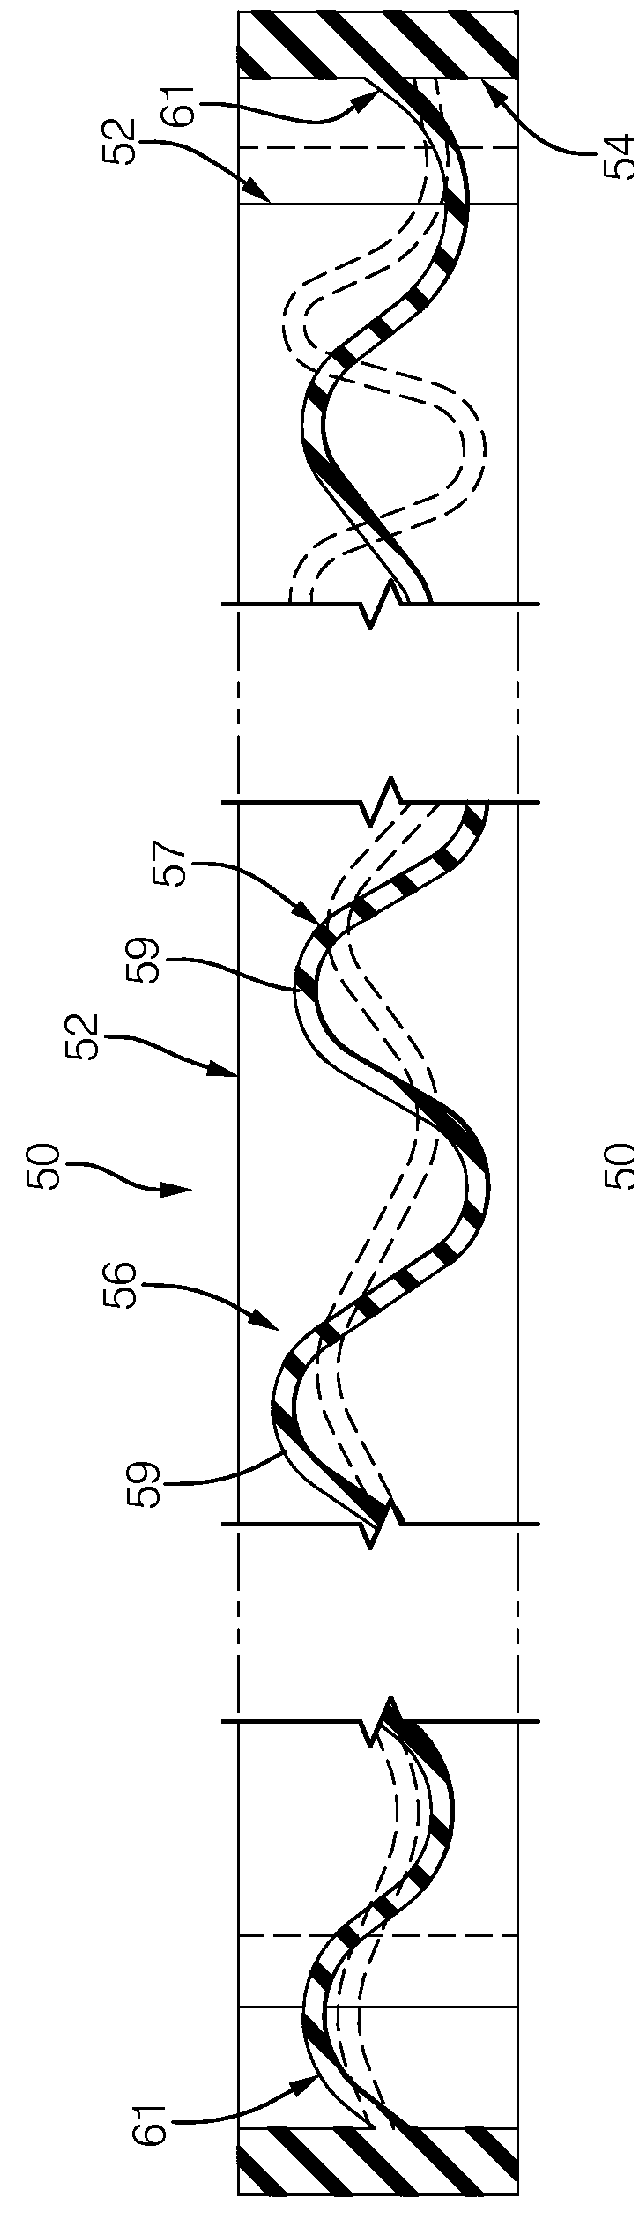 Haptic control device including a seal